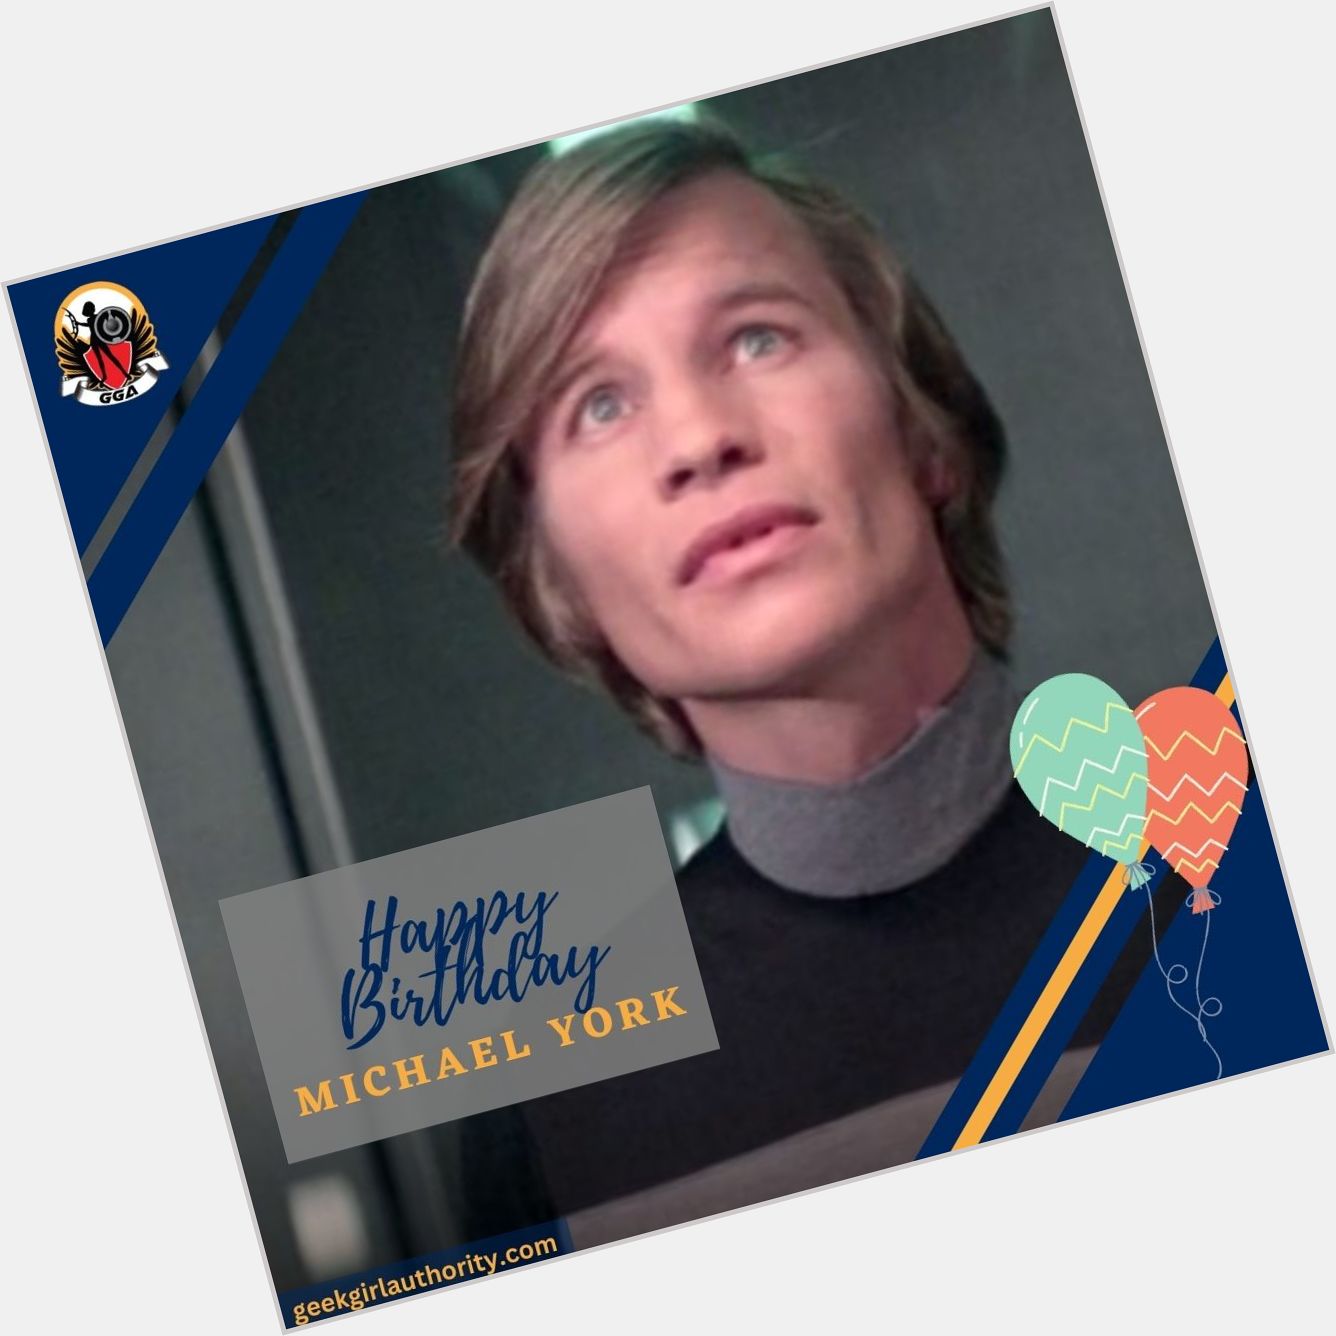 Happy Birthday, Michael York! Which one of his roles is your favorite? 